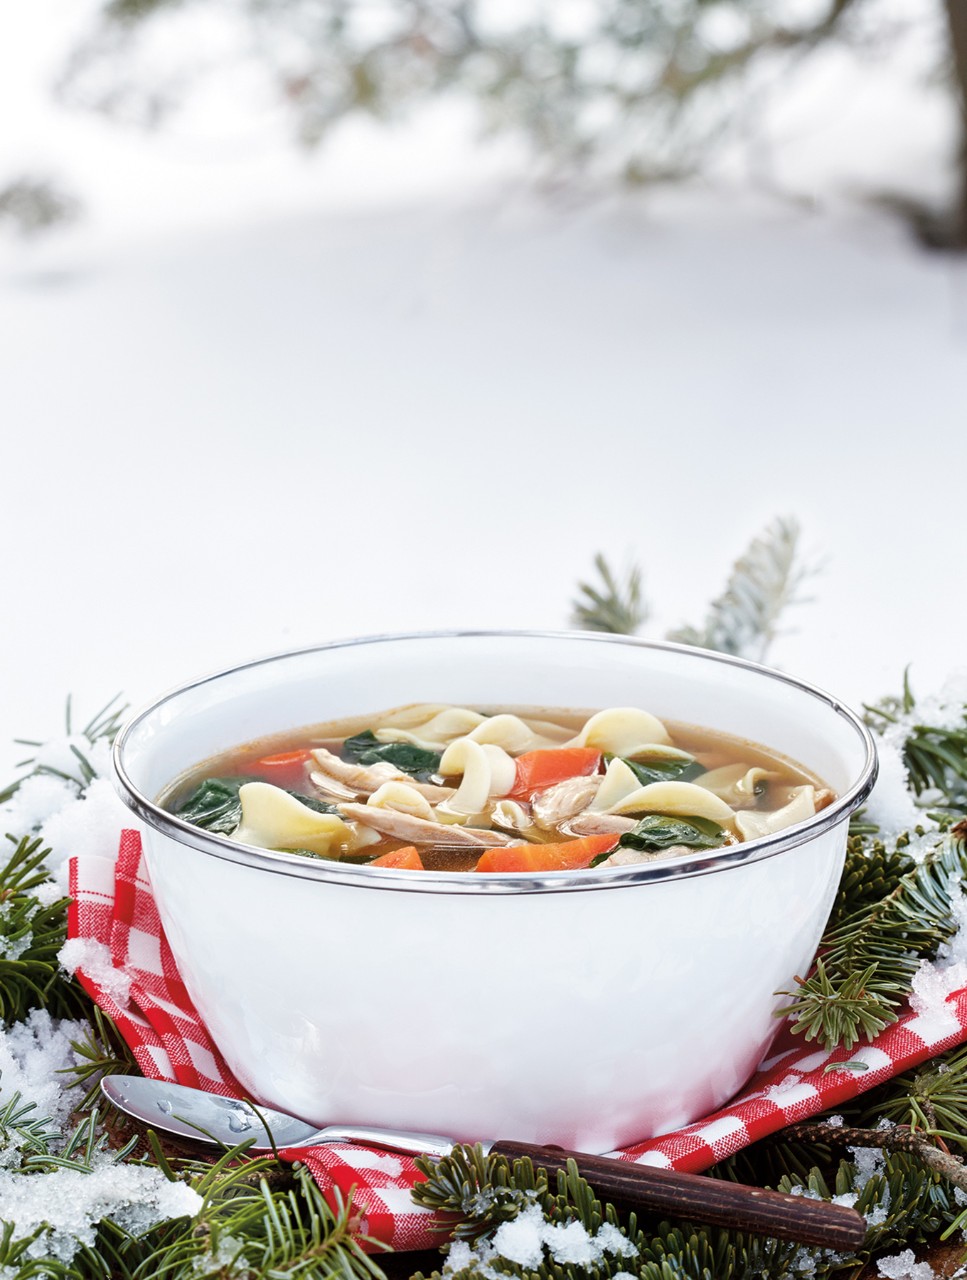 Lemon-Grass Chicken Soup with Egg Noodles